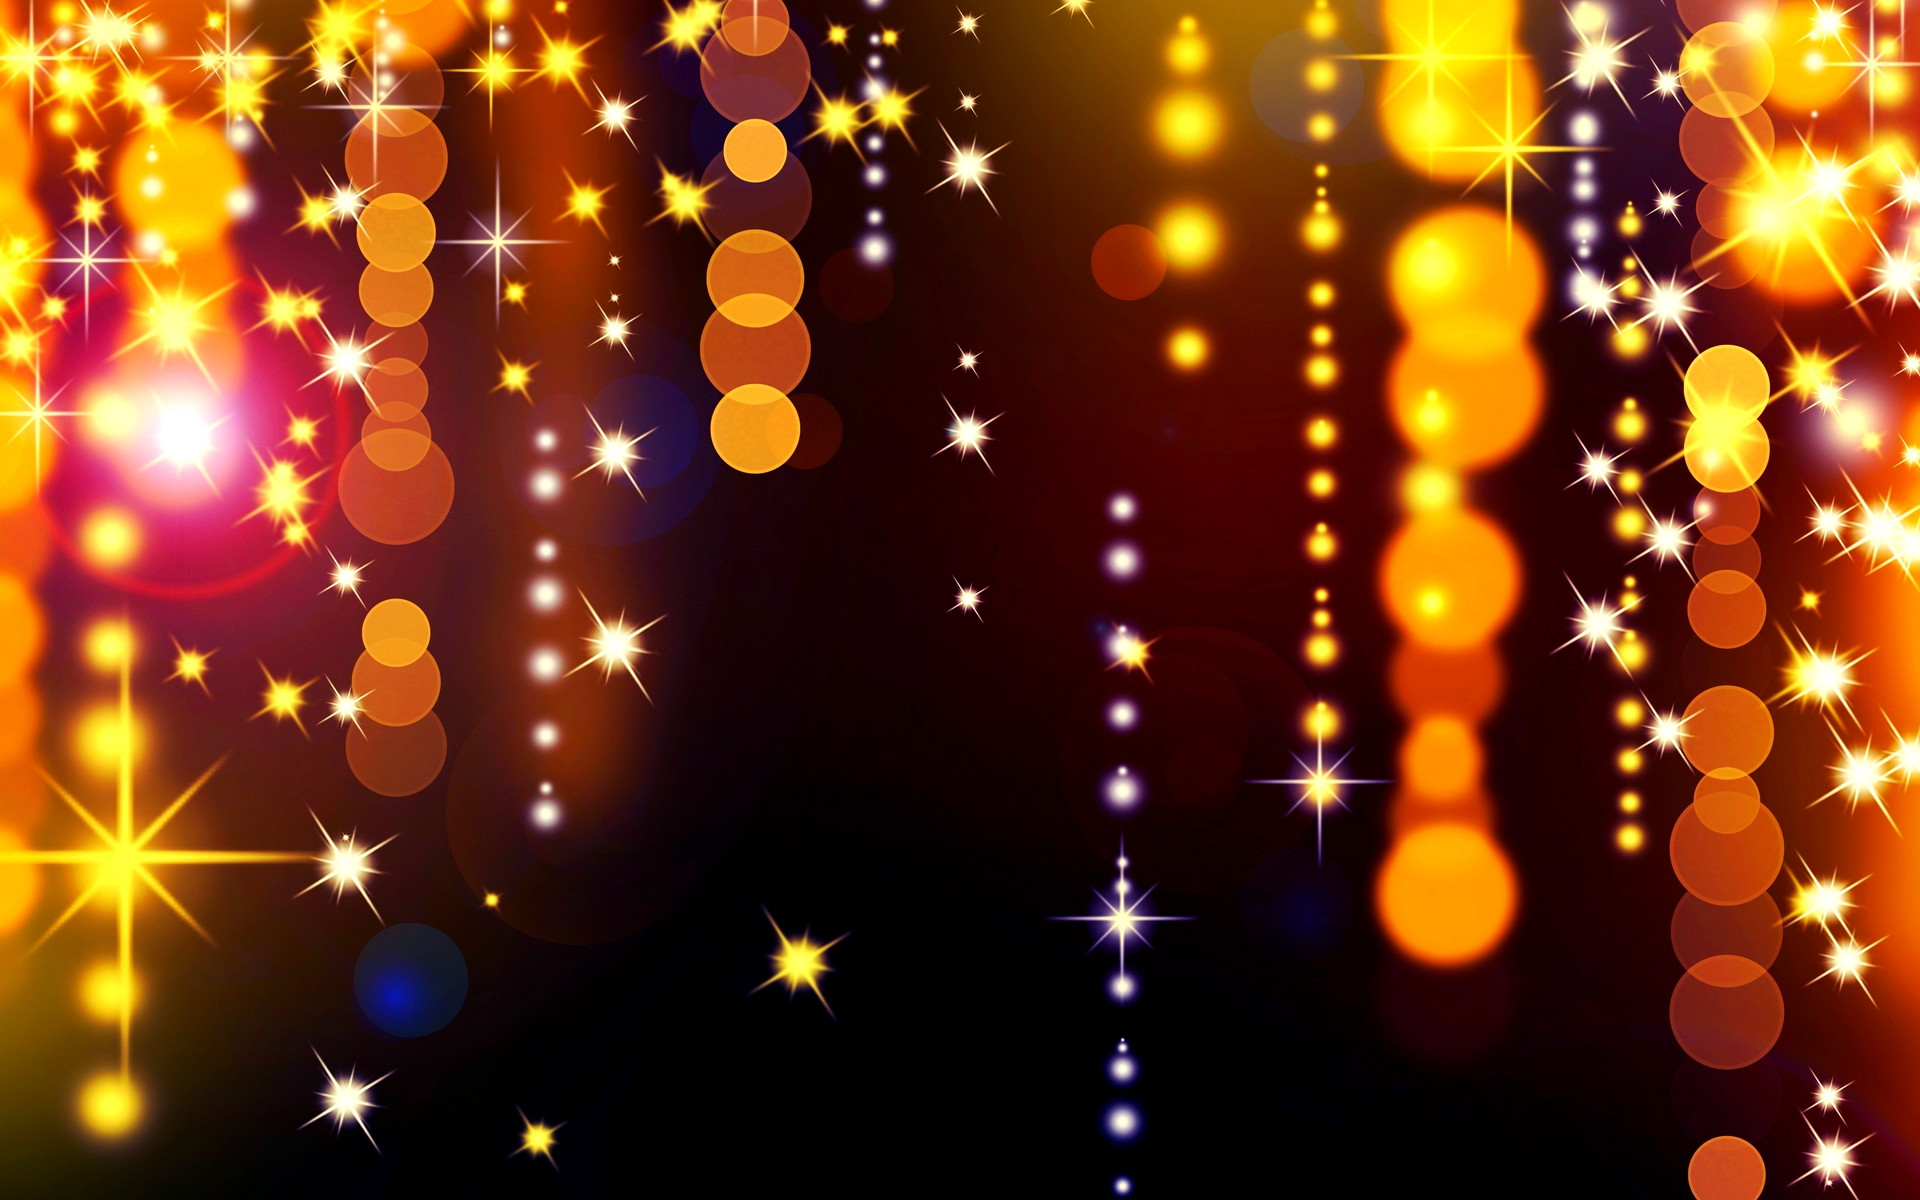 Christmas Lights And More - Christmas Lights Background Free , HD Wallpaper & Backgrounds